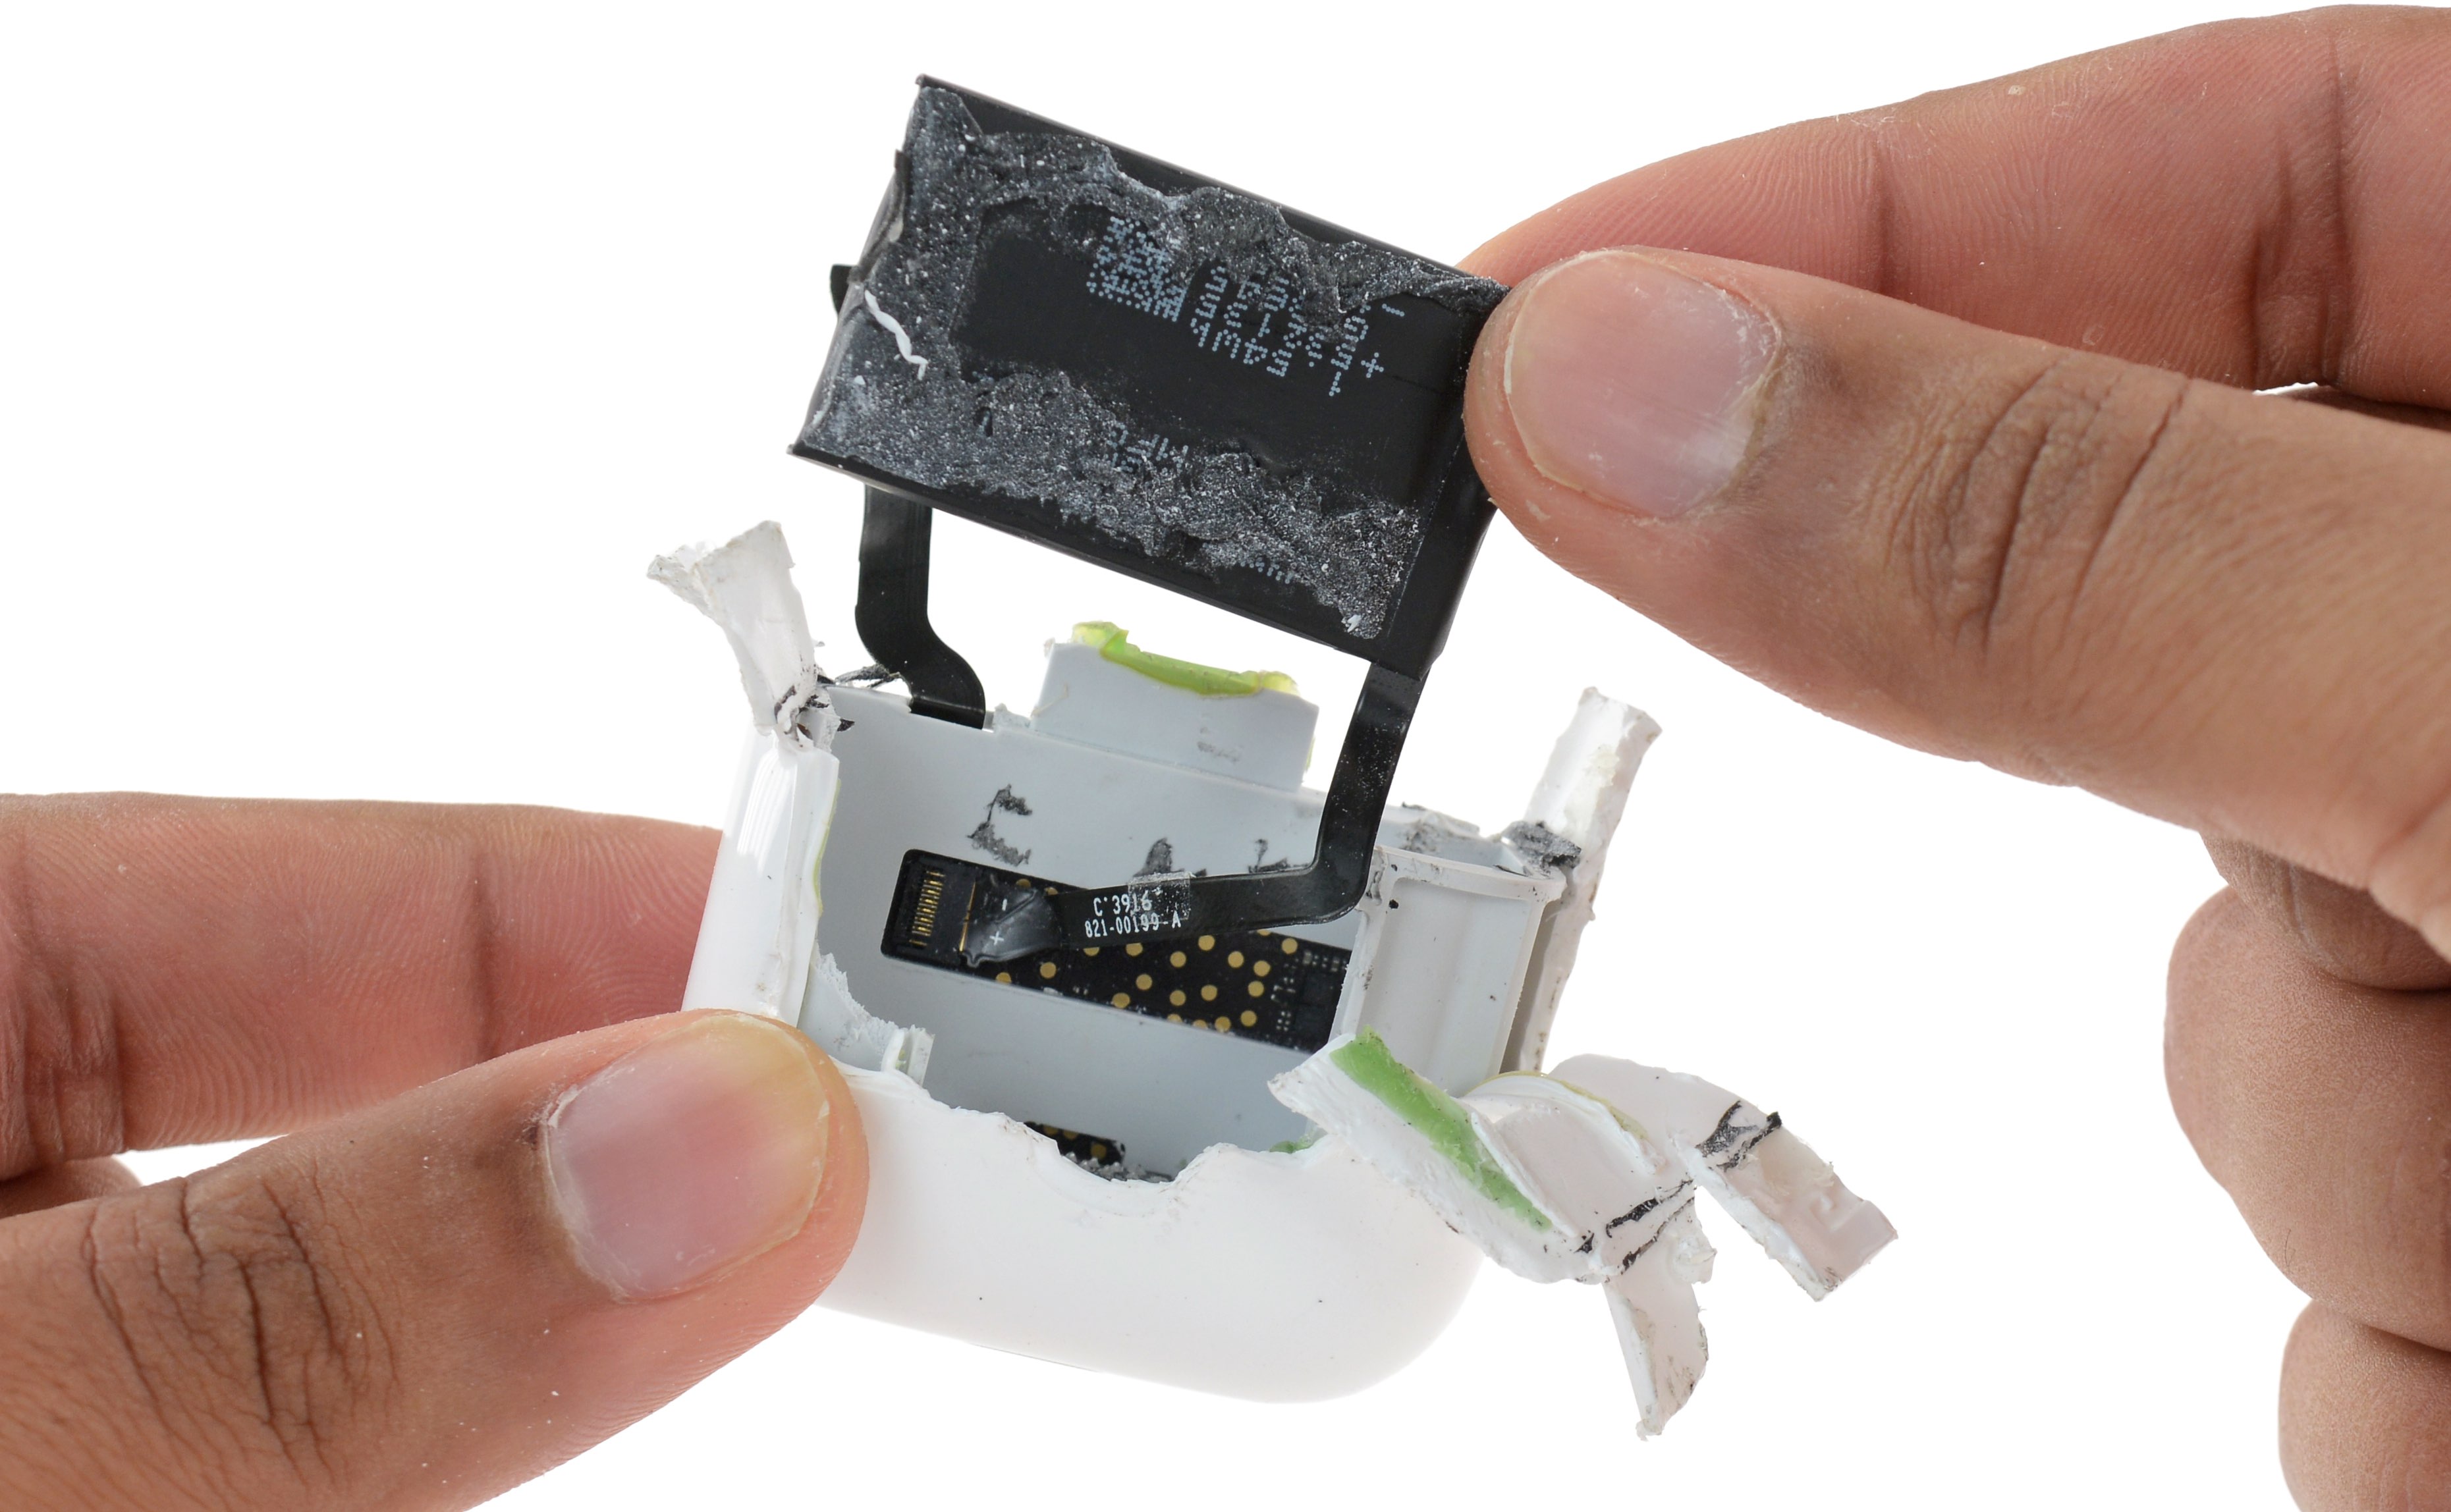 AirPods-iFixit-image-011